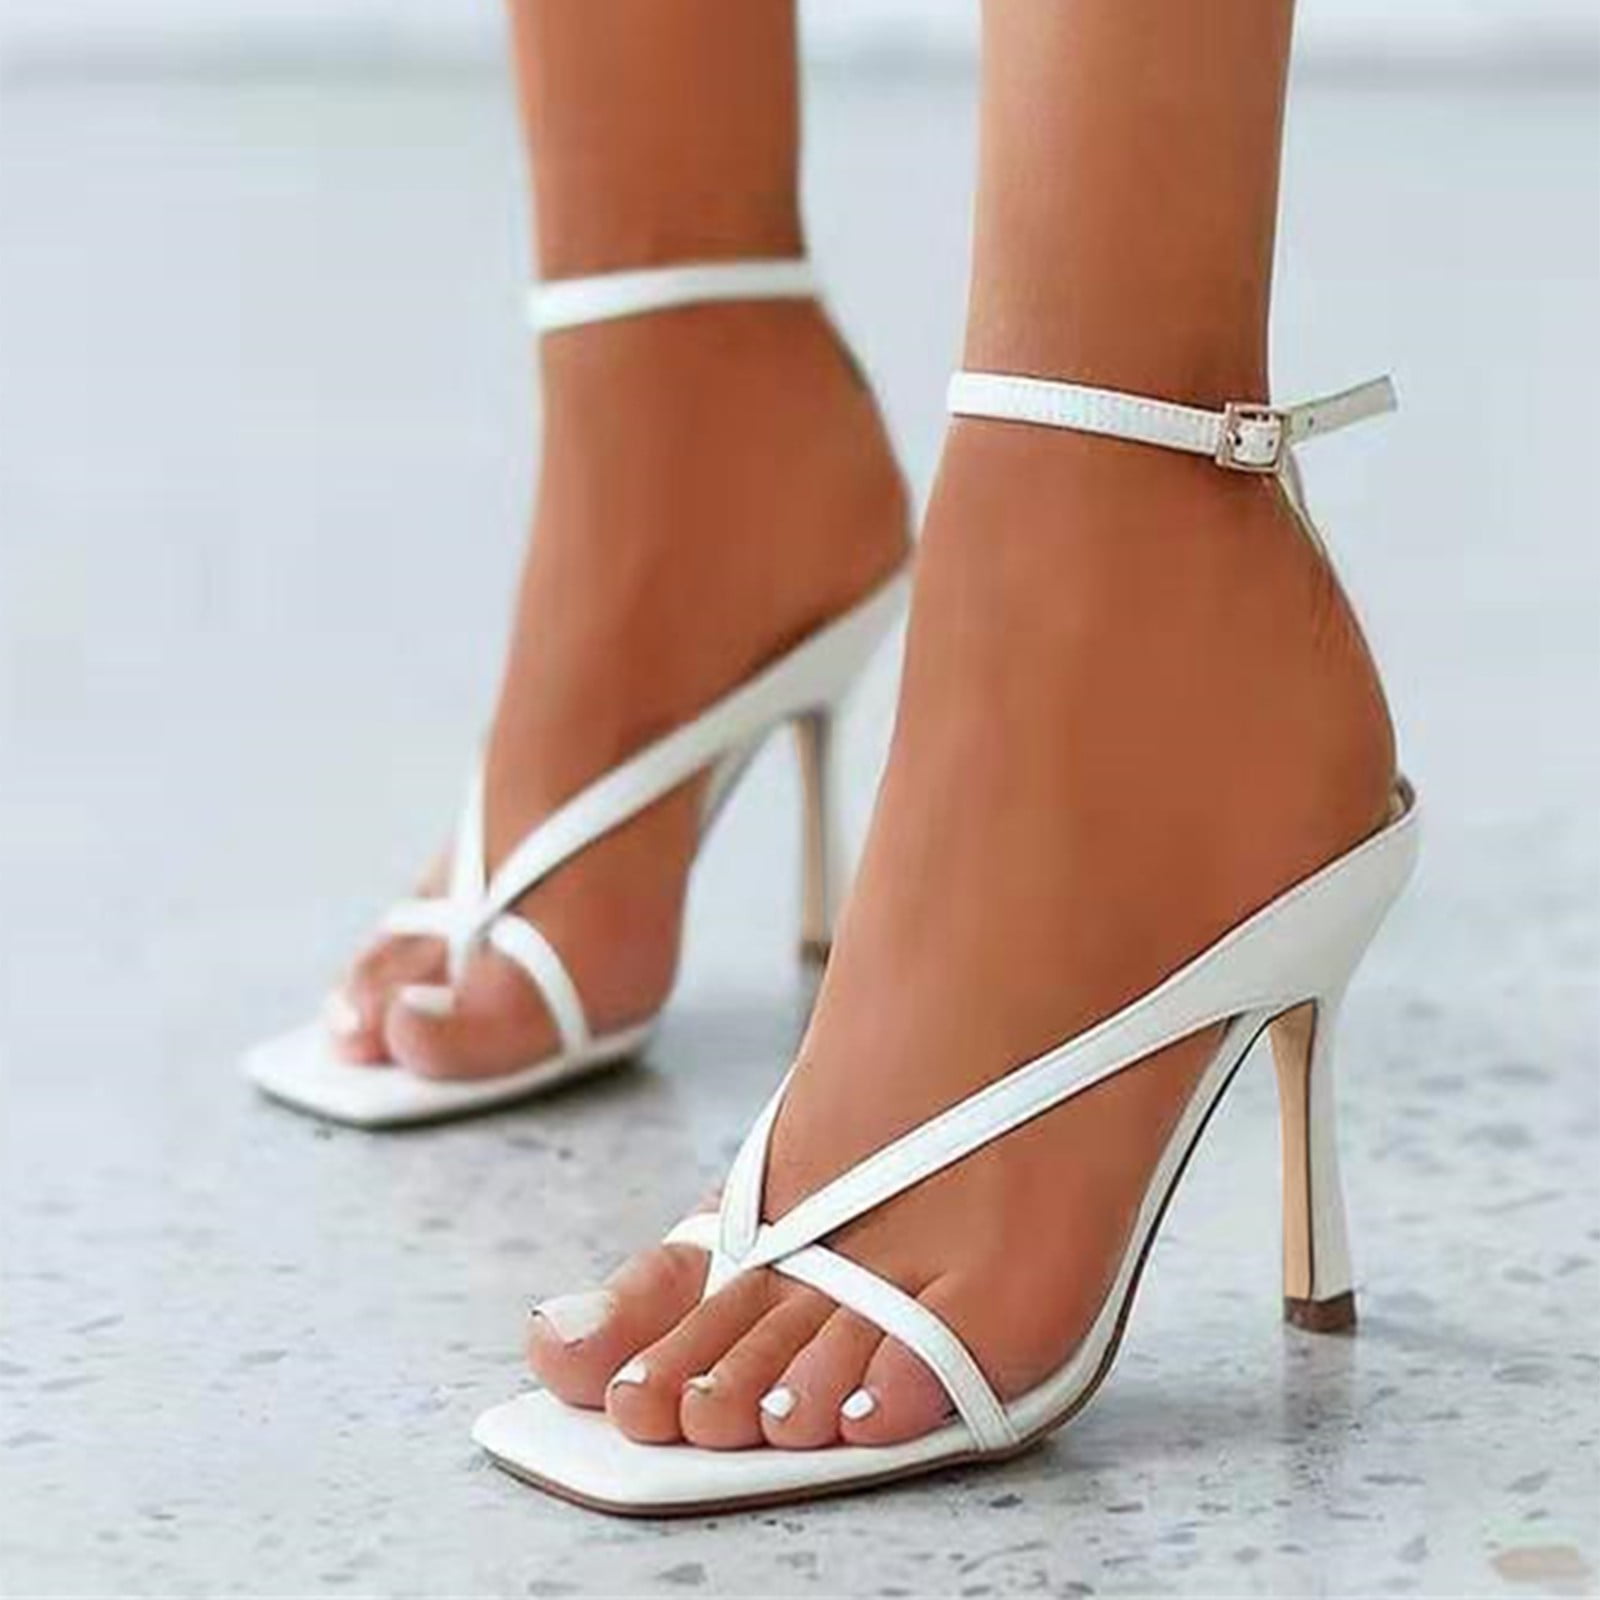 White Clear Heel Lace Up Heels | Shoes | Heels, Clear heels, Lace up heels